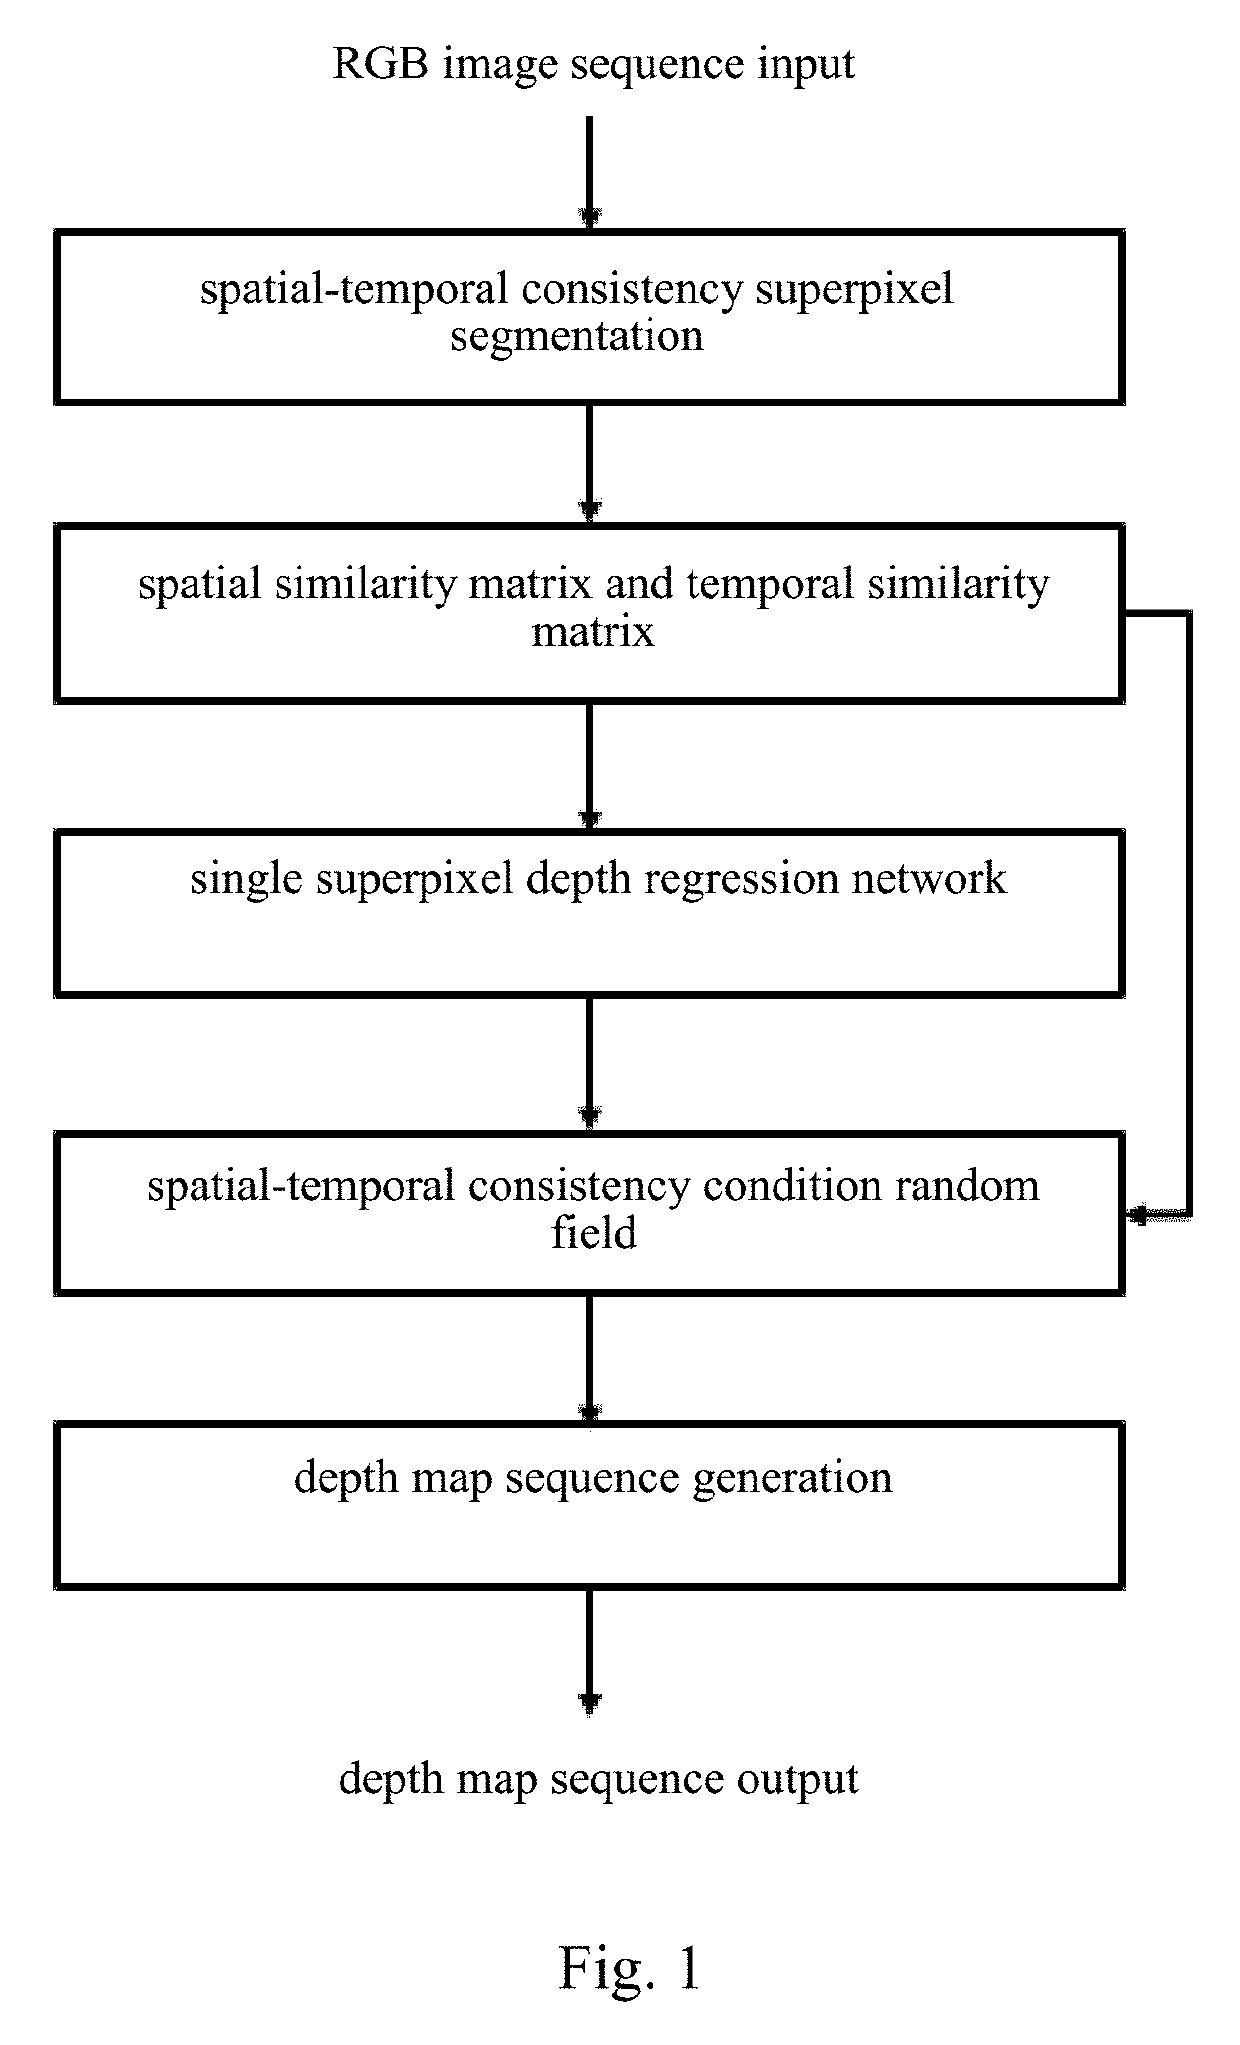 Method for generating spatial-temporally consistent depth map sequences based on convolution neural networks